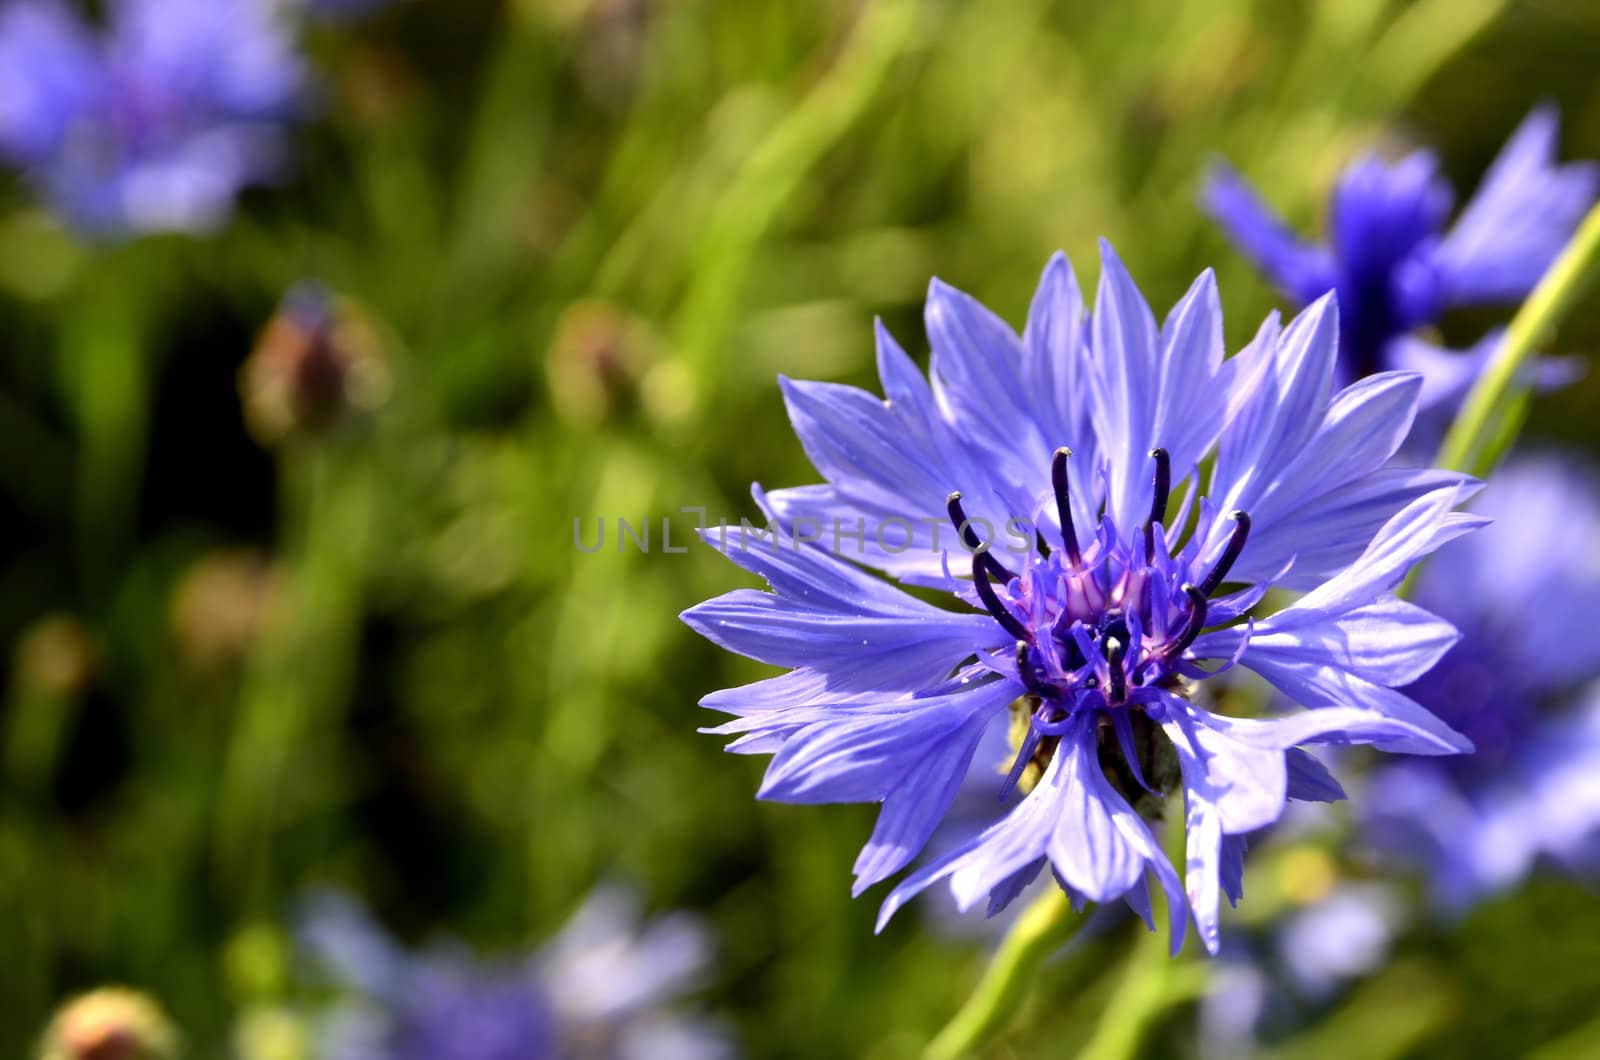 This photo present cornflower on the blurred background of meadows.